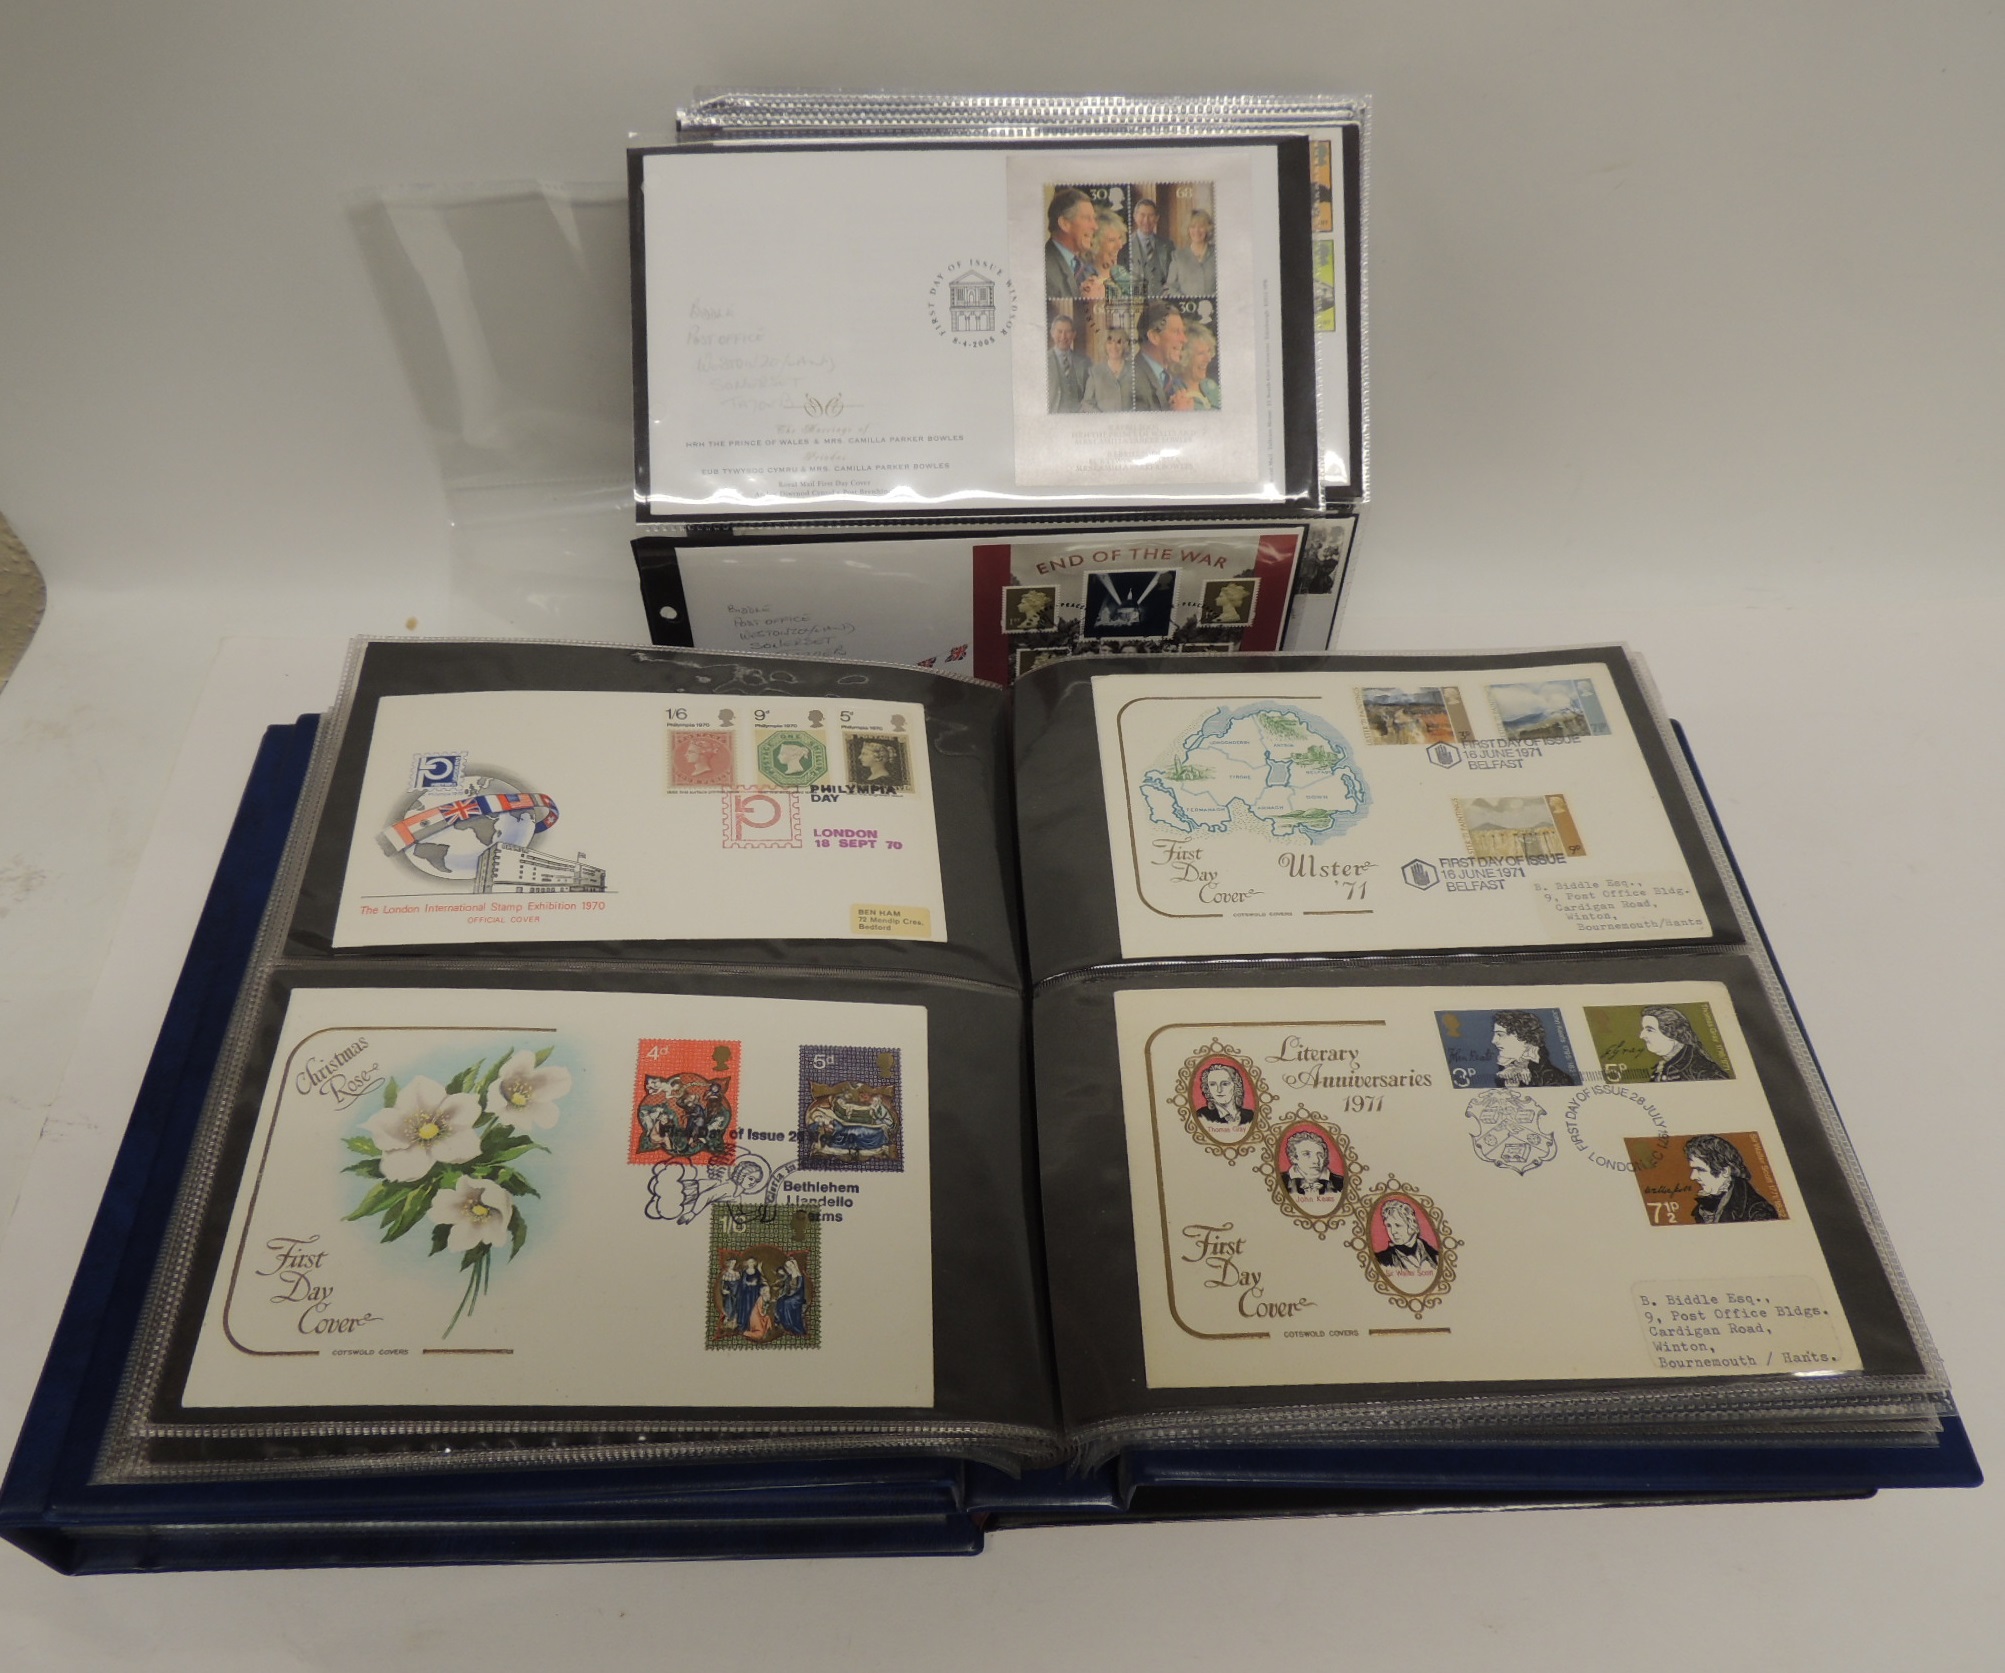 GREAT BRITAIN - 248 illustrated First Day Covers between 1964 and 2005 and a few earlier plain fdc